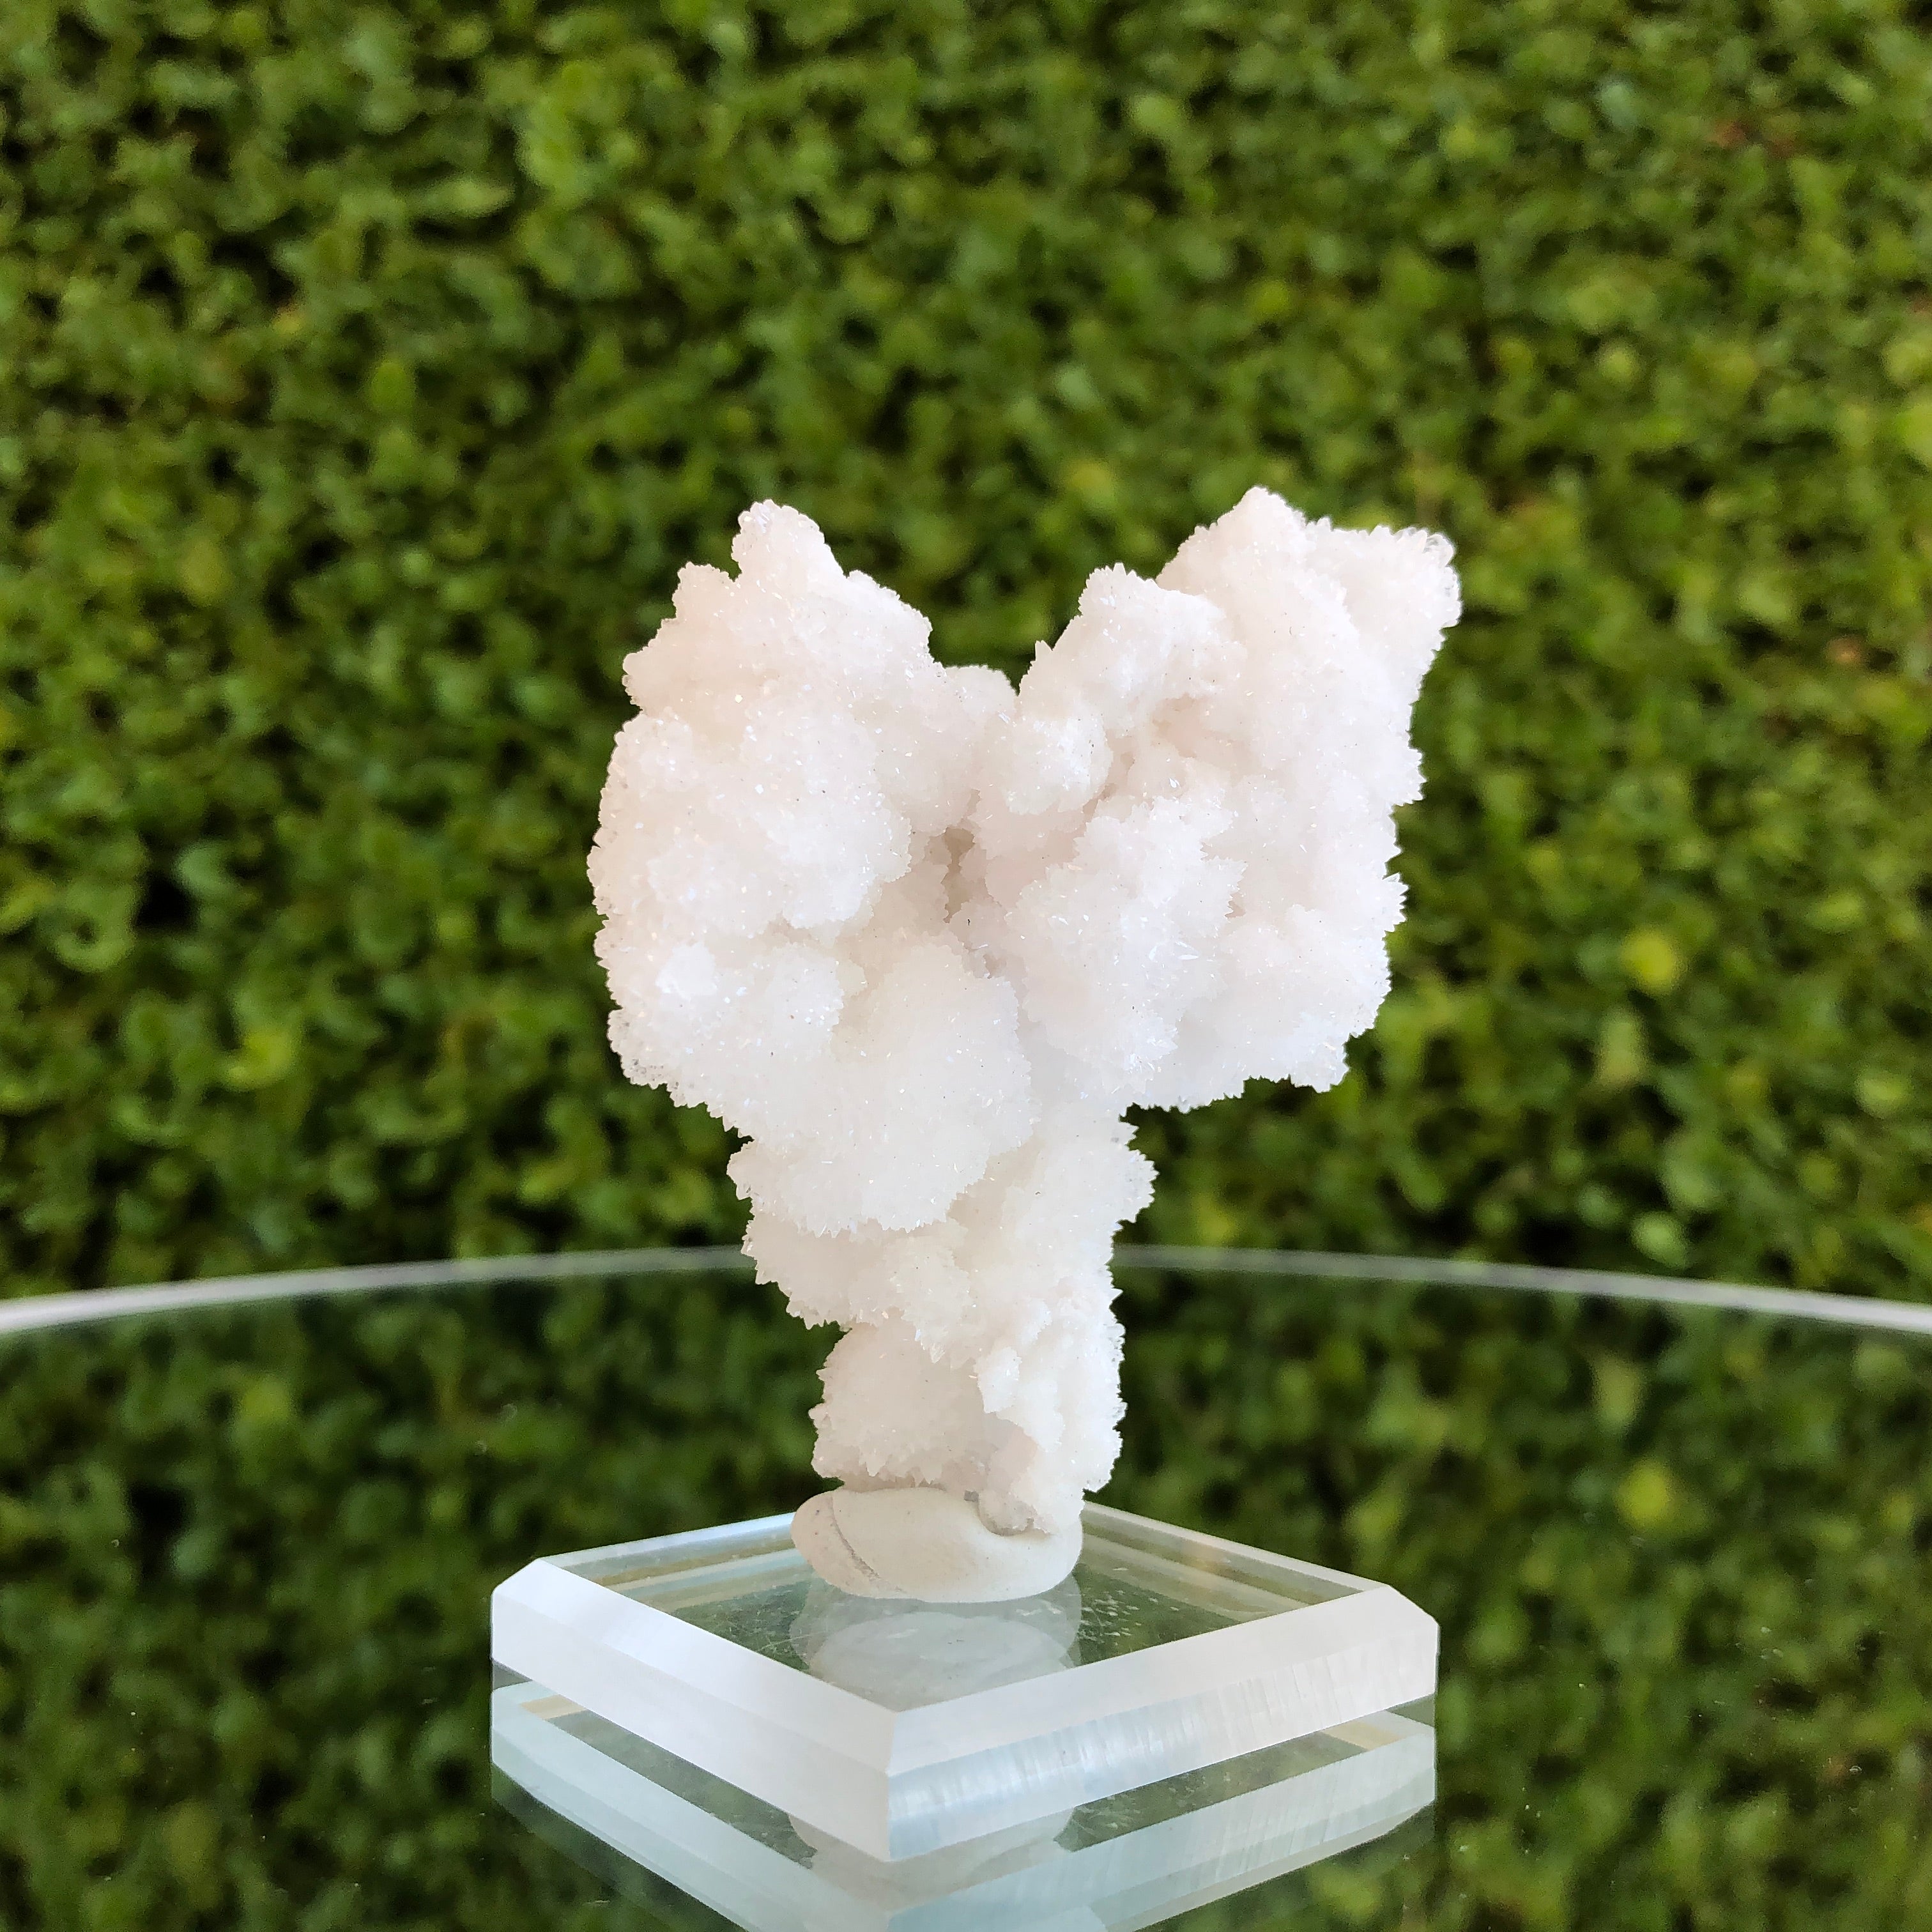 53g 3x6x7cm Victories Angel White Stalactite Stalagmite Calcite from Mexico